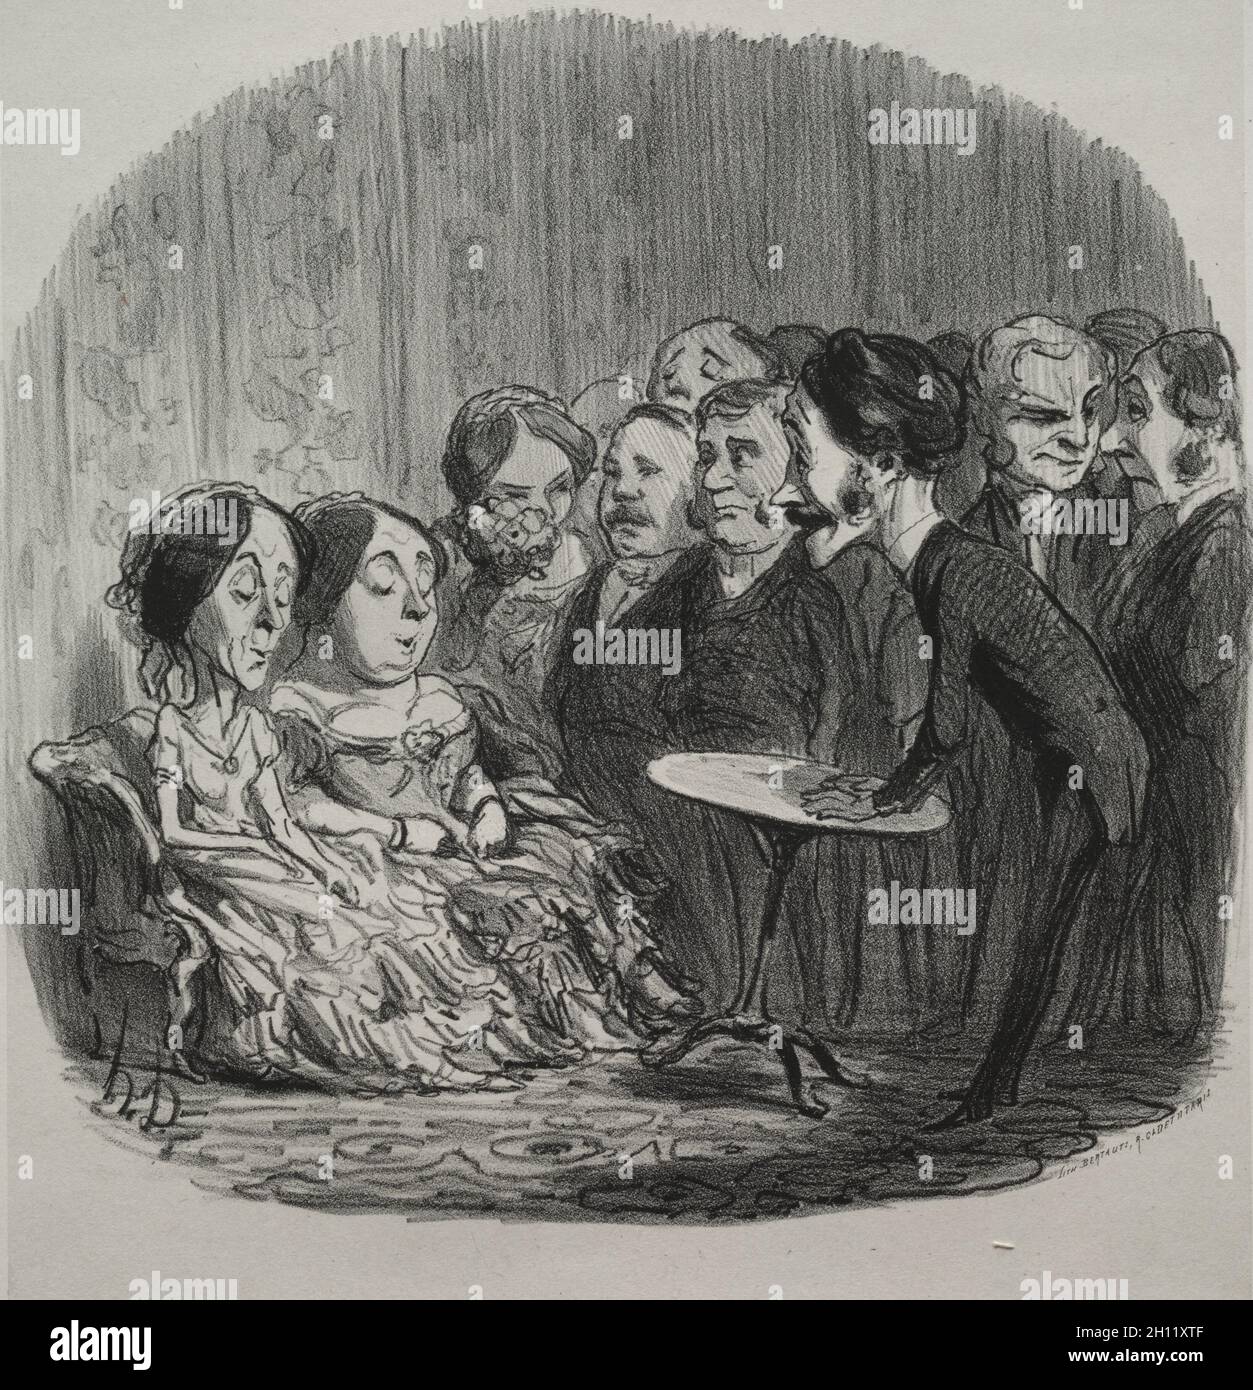 Rapping Spirits, 1851. Honoré Daumier (French, 1808-1879). Lithograph; sheet: 35.8 x 27.4 cm (14 1/8 x 10 13/16 in.); image: 21.3 x 22.1 cm (8 3/8 x 8 11/16 in.). Stock Photo